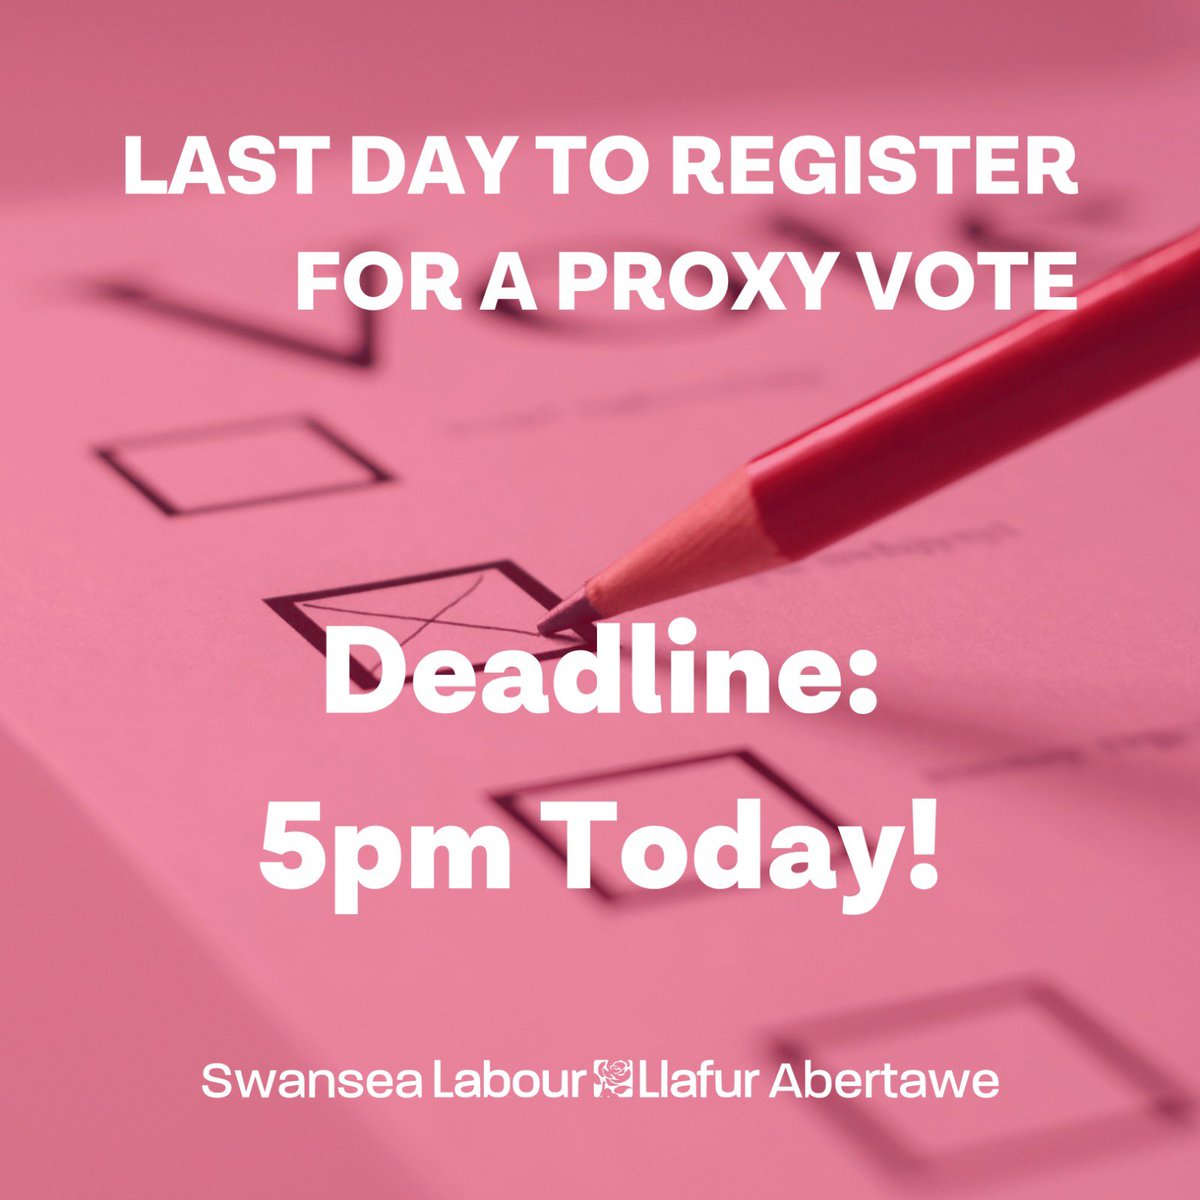 Not going to be here on polling day? Today is the last day to register for a proxy vote! 🗳 You have until 5pm today to sort out your proxy vote. Visit swansea.gov.uk/article/14257/… for more information #localelections2022 #BuildingABetterSwansea